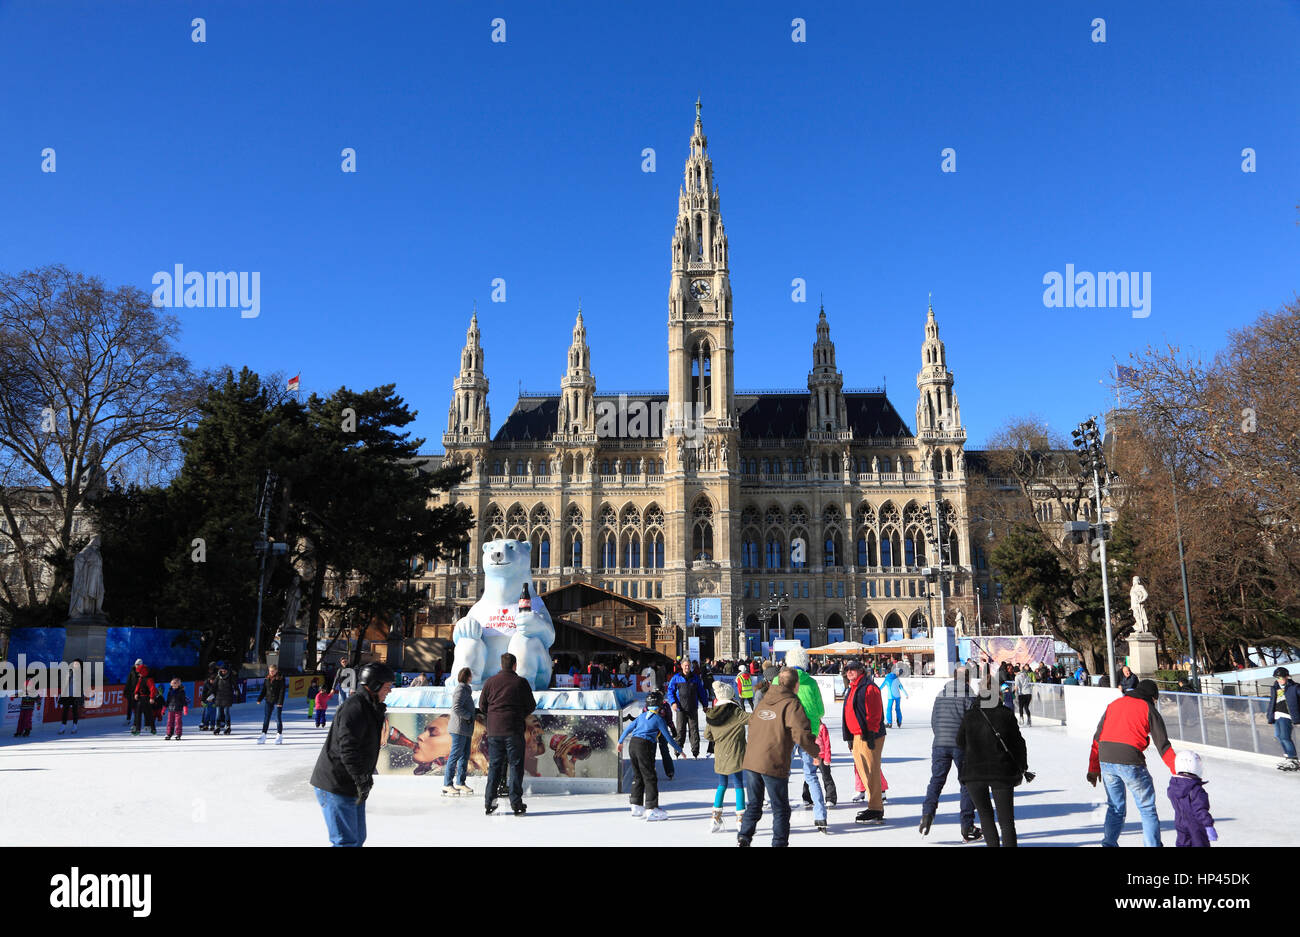 Ice-skating square in front of town hall,  Vienna, Austria, Europe Stock Photo